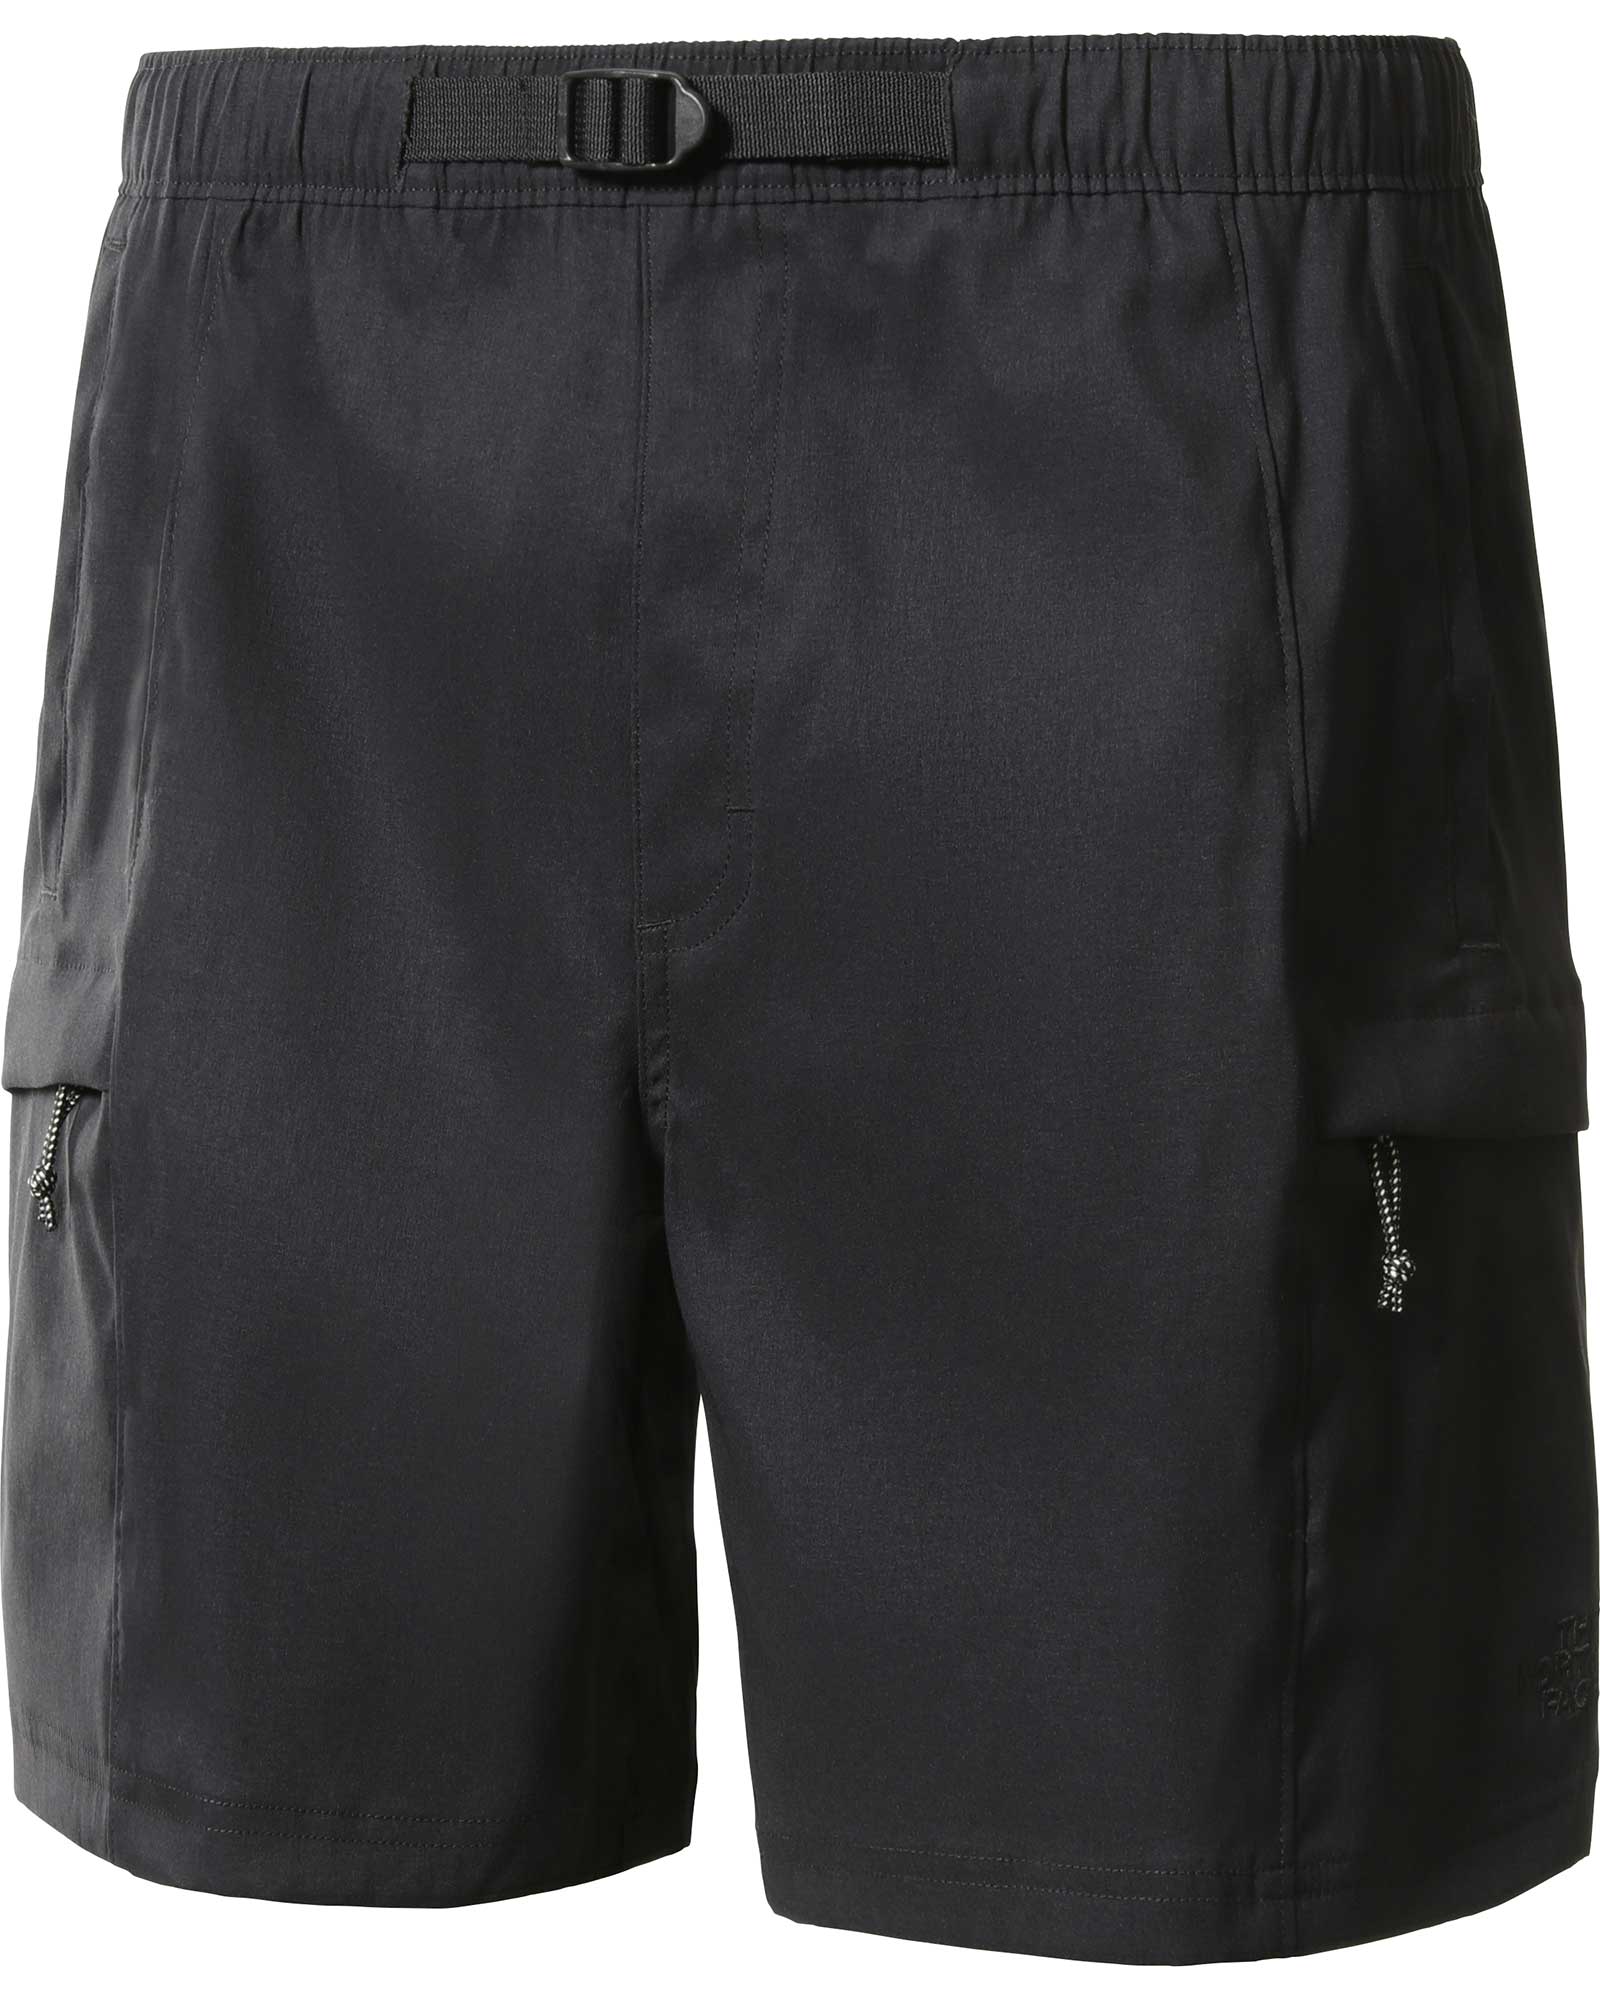 Product image of The North Face Class V Belted Men's Shorts